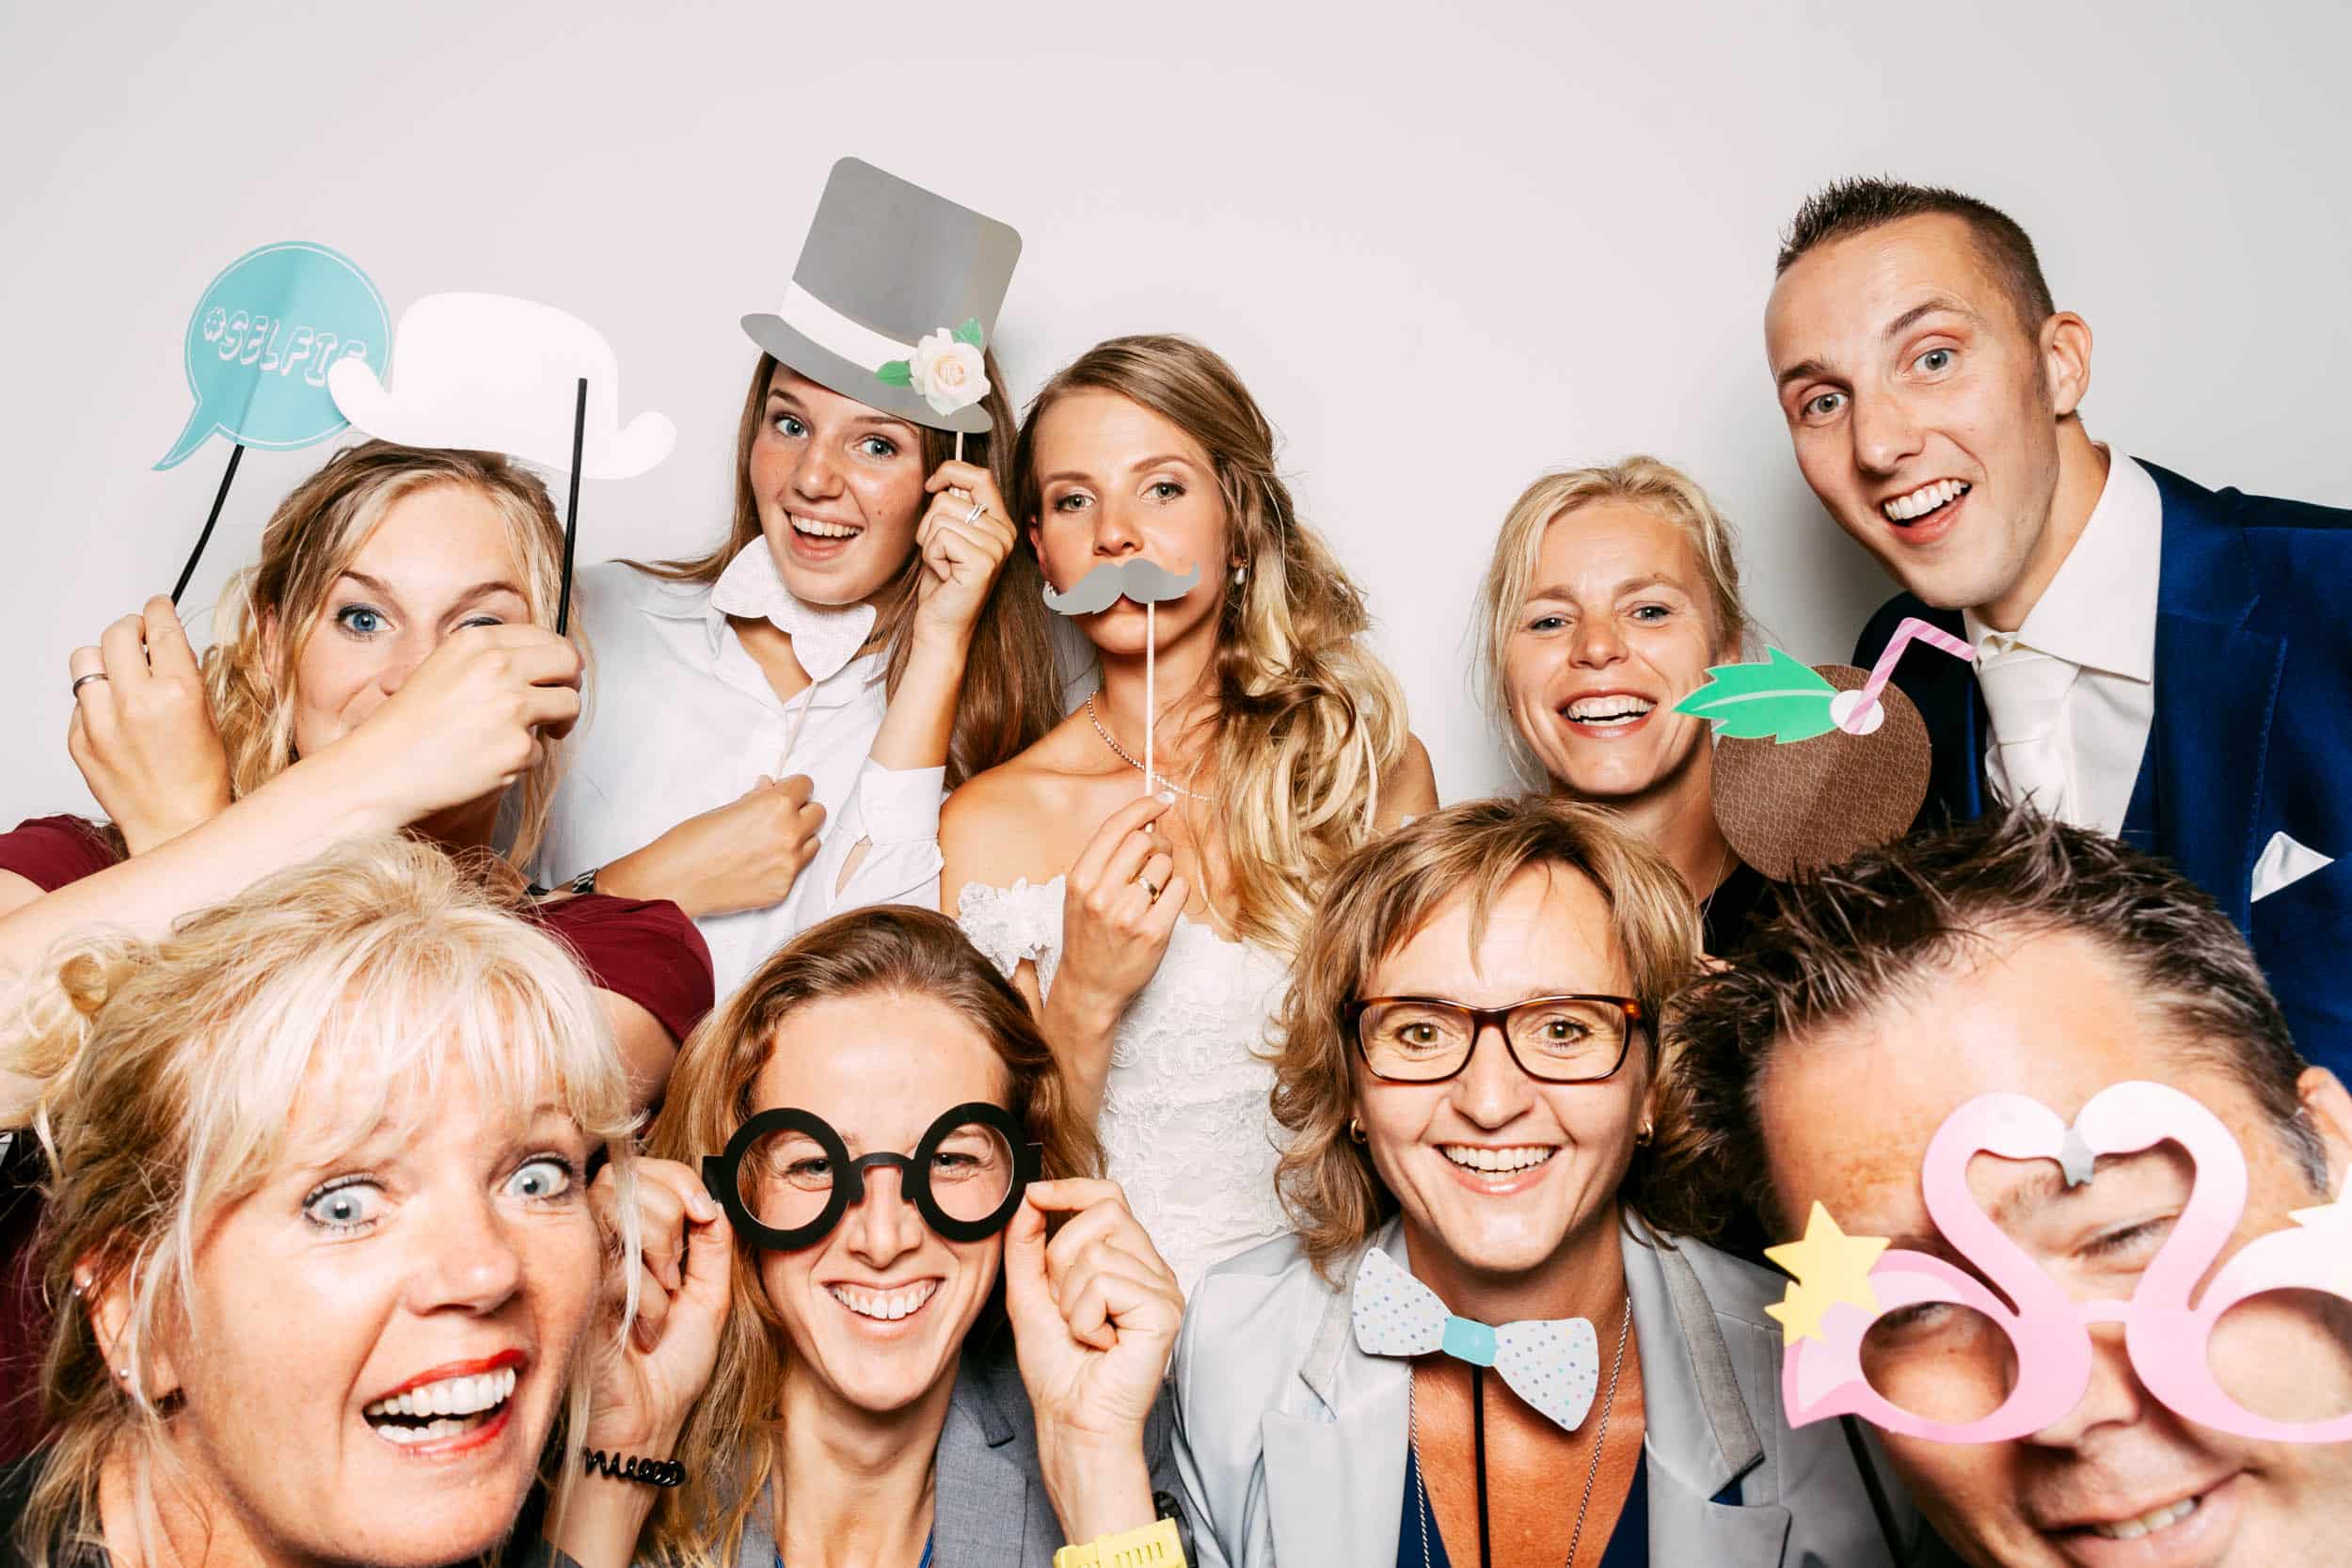 A group of people pose in a photobooth at a wedding.